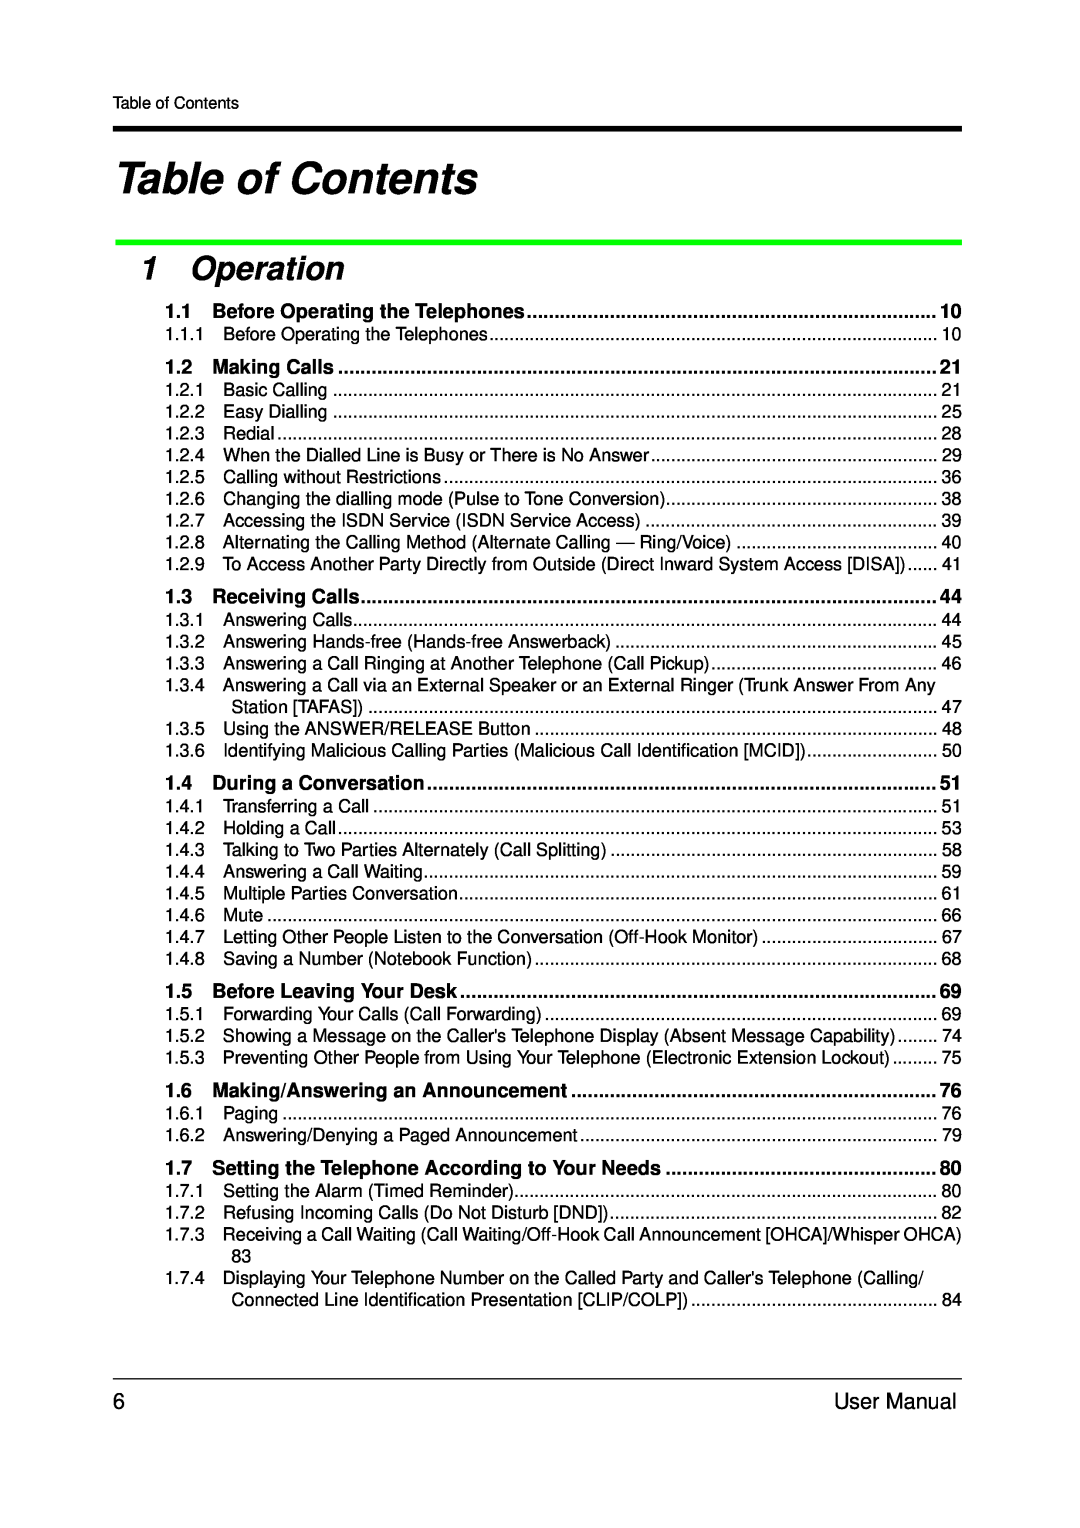 Panasonic KX-TDA200 user manual Table of Contents, Operation 